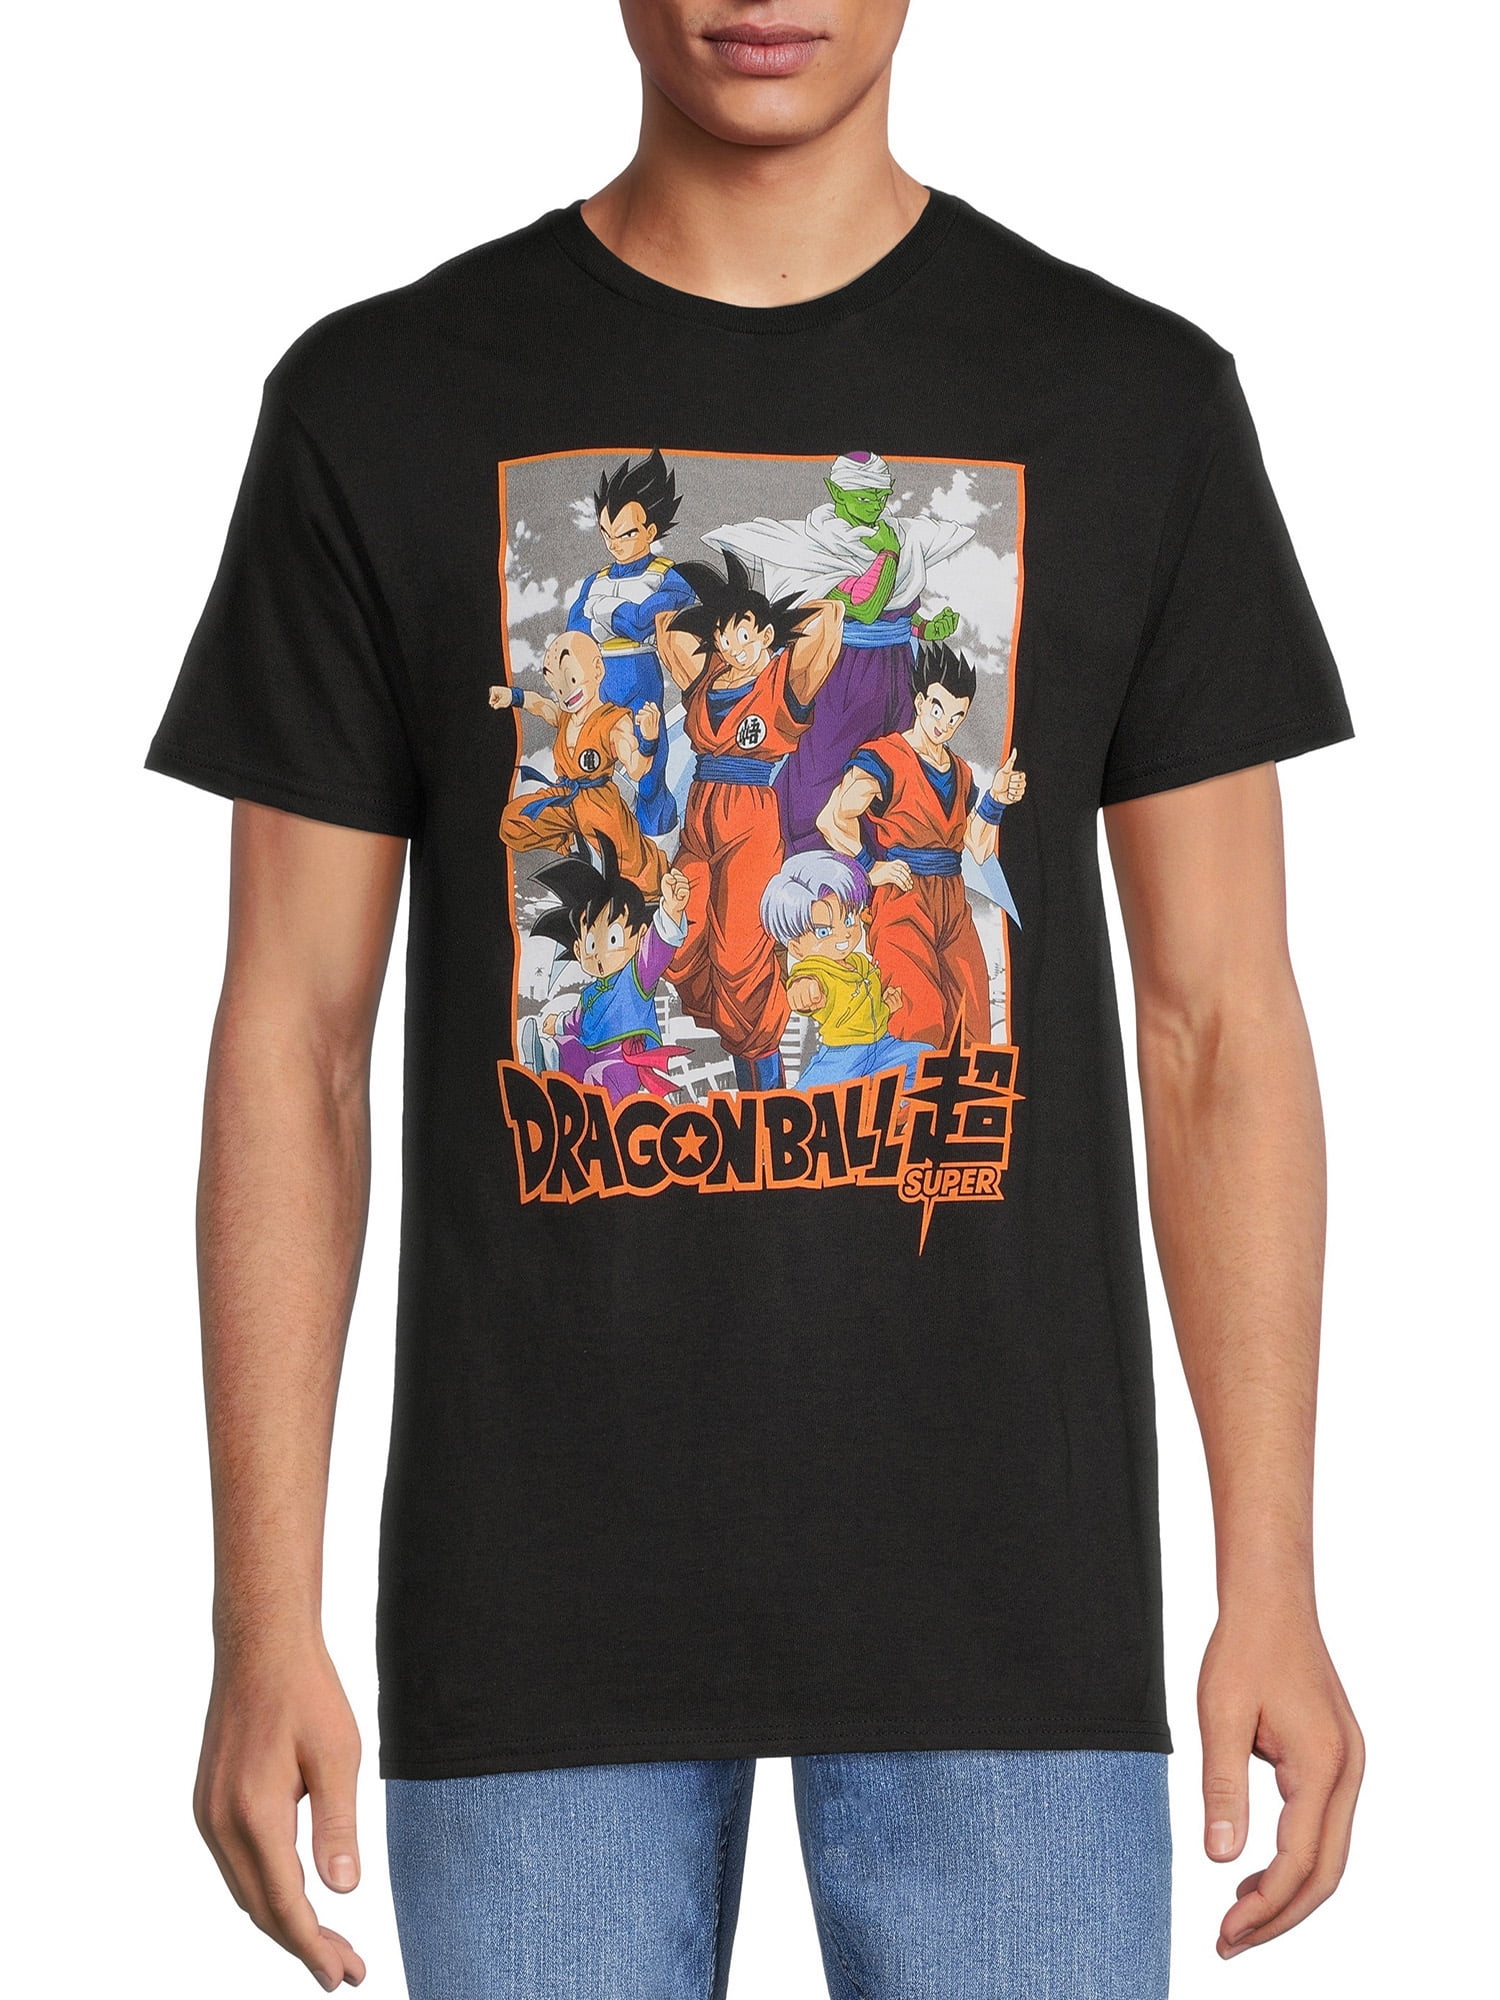 Dragon Ball Z Graphic Tee with Short Sleeves - Walmart.com